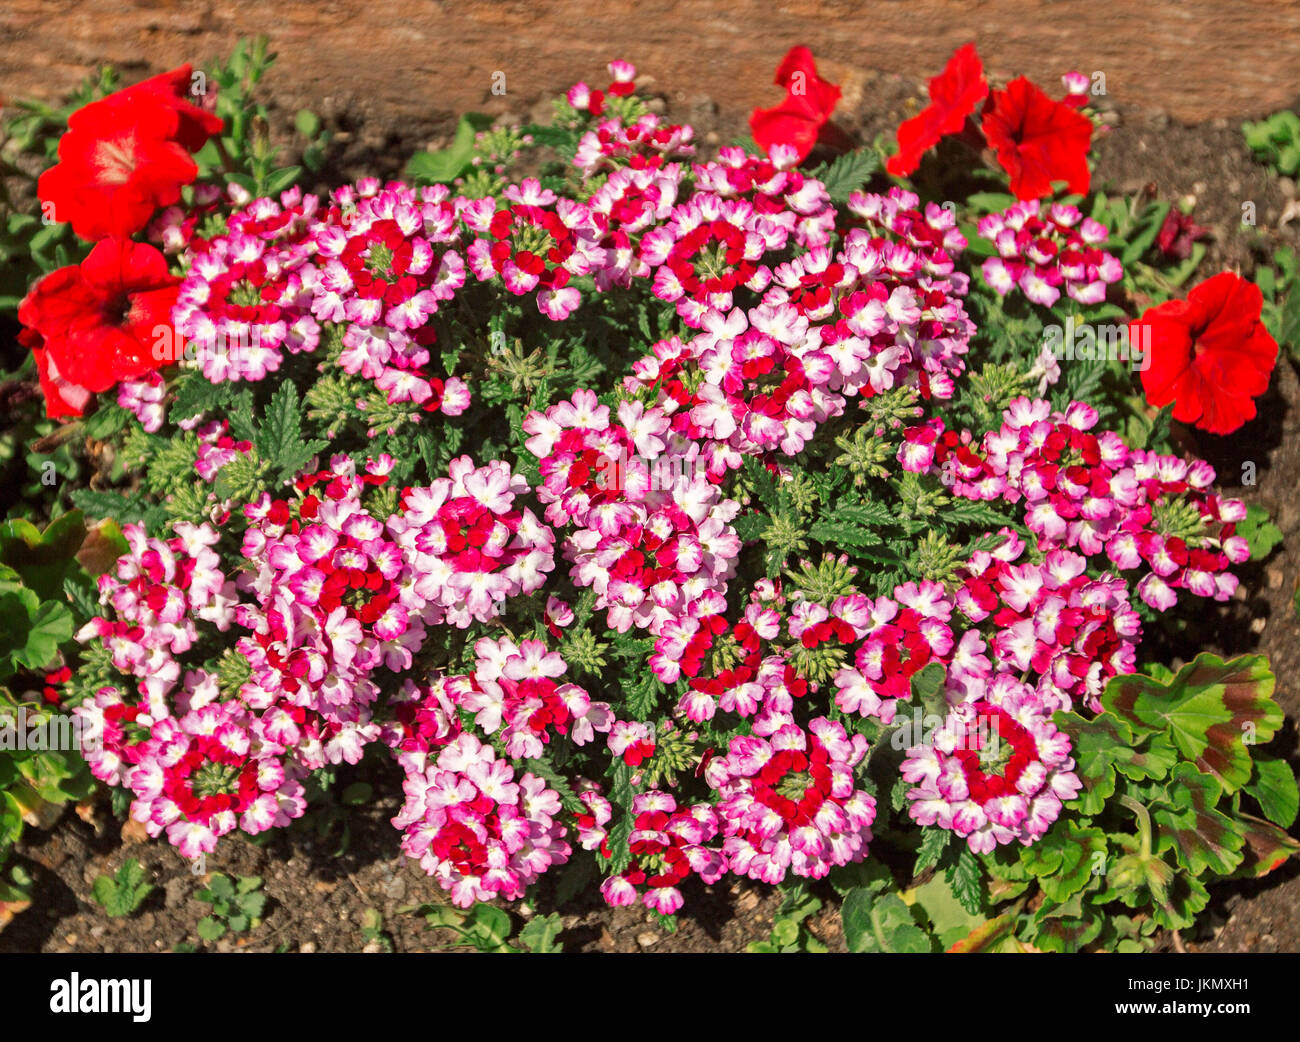 Cluster of unusual and stunning red and white flowers of verbena, a low growing ground cover or rockery plant. Stock Photo